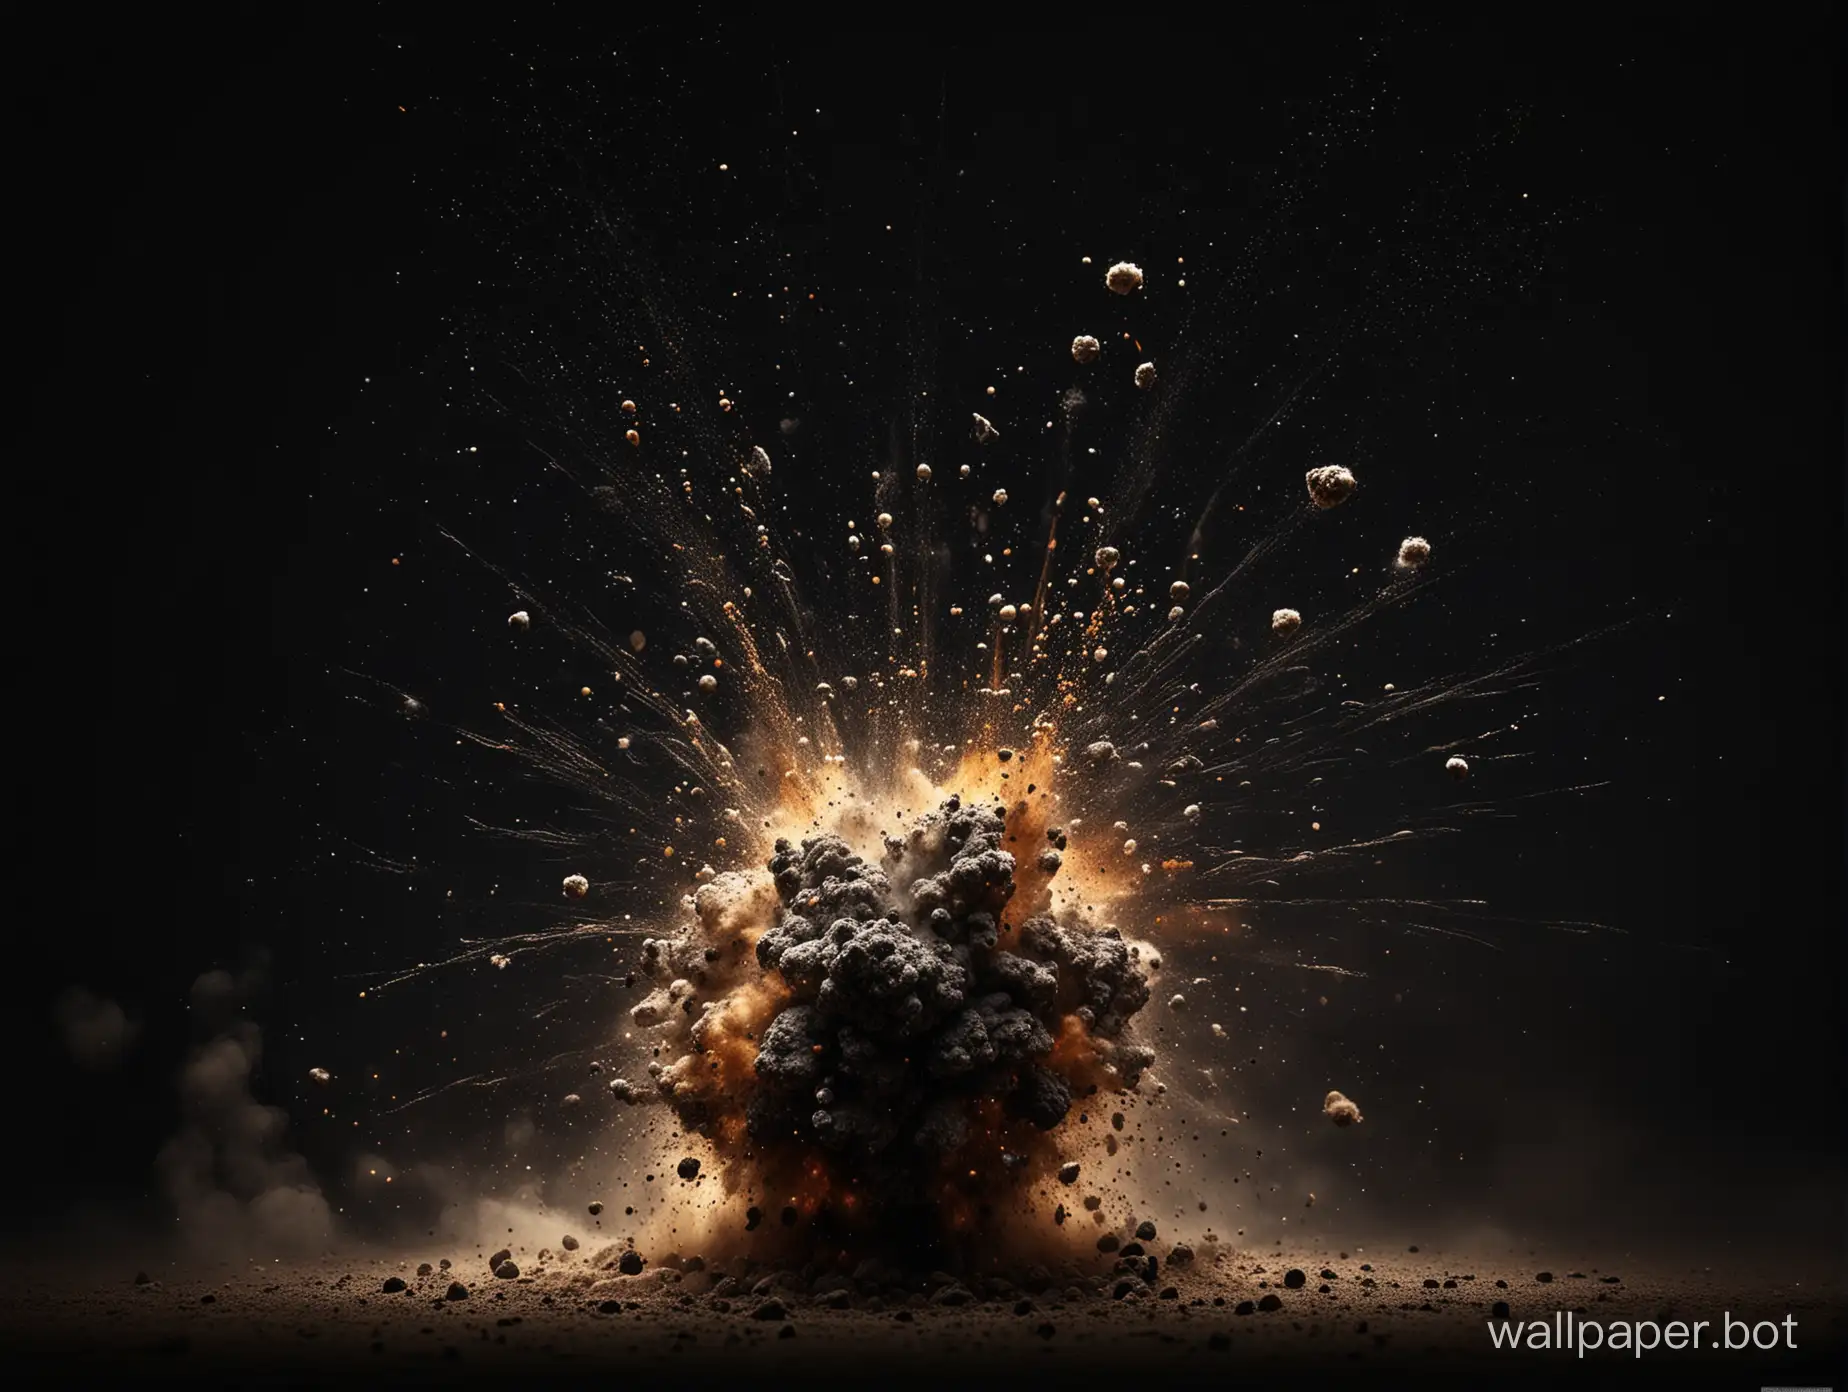 Dynamic-Dark-Wallpaper-Featuring-Small-Dust-Particle-Explosion